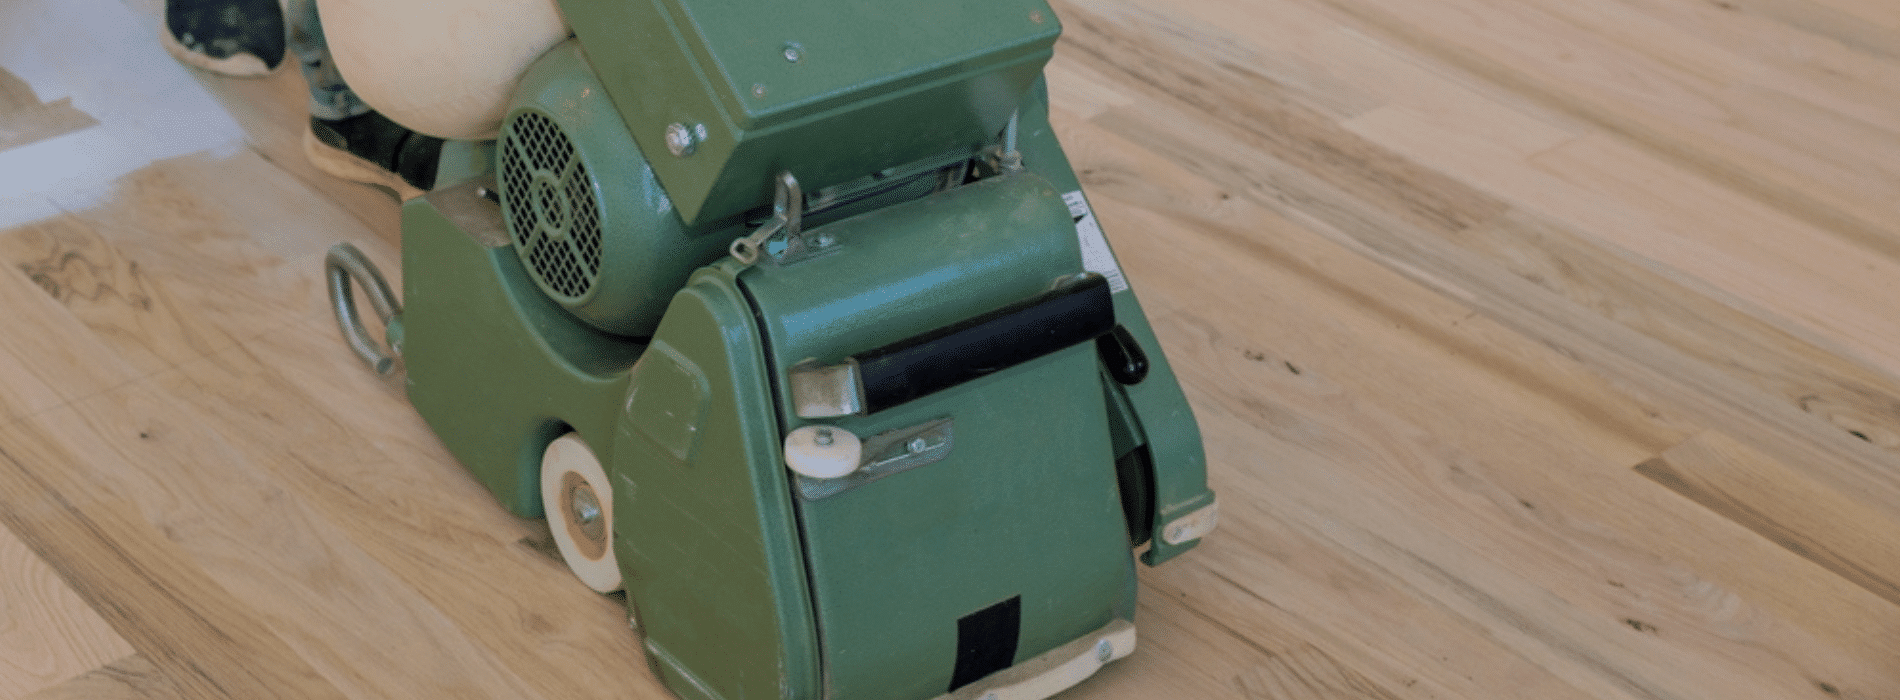 In Anerley, SE20, Mr Sander® use a Bona Scorpion drum sander (200 mm) with a power of 1.5 kW, operating at 240 V and 50 Hz. This equipment is connected to a dust extraction system equipped with a HEPA filter, ensuring a clean and efficient outcome during the sanding process.